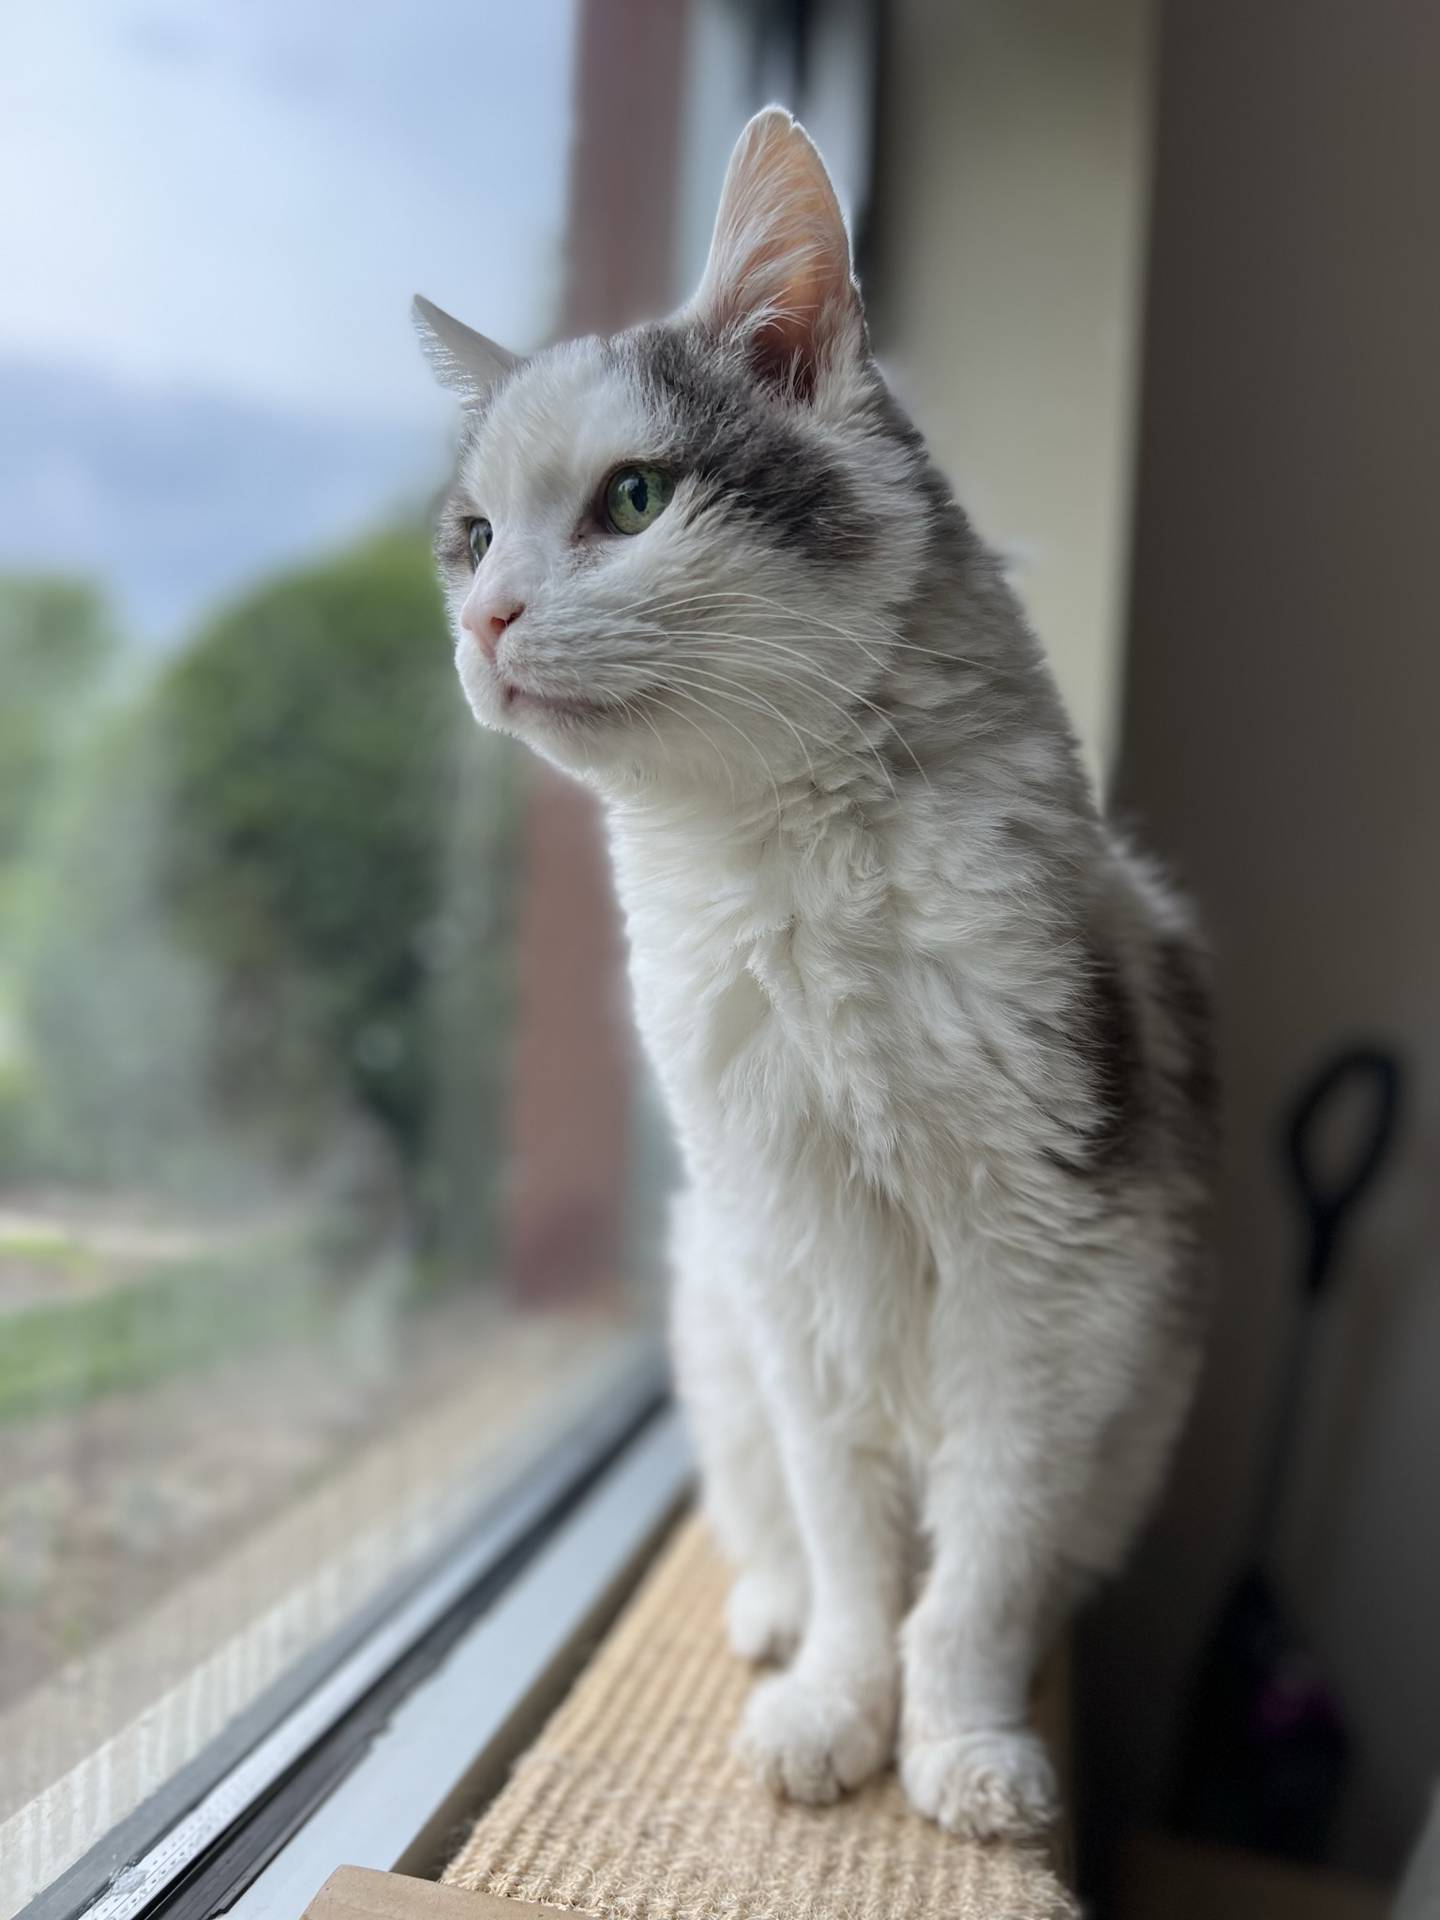 Jojo is a 13-year-old medium-hair. He has a friendly and sweet personalit. He is a calm, gentle and talkative. He will loves chin and neck scratches. He would love a home with a comfortable couch and a window to see the world. To meet Jojo, email Catadoptions@nawsus.org. Visit nawsus.org.